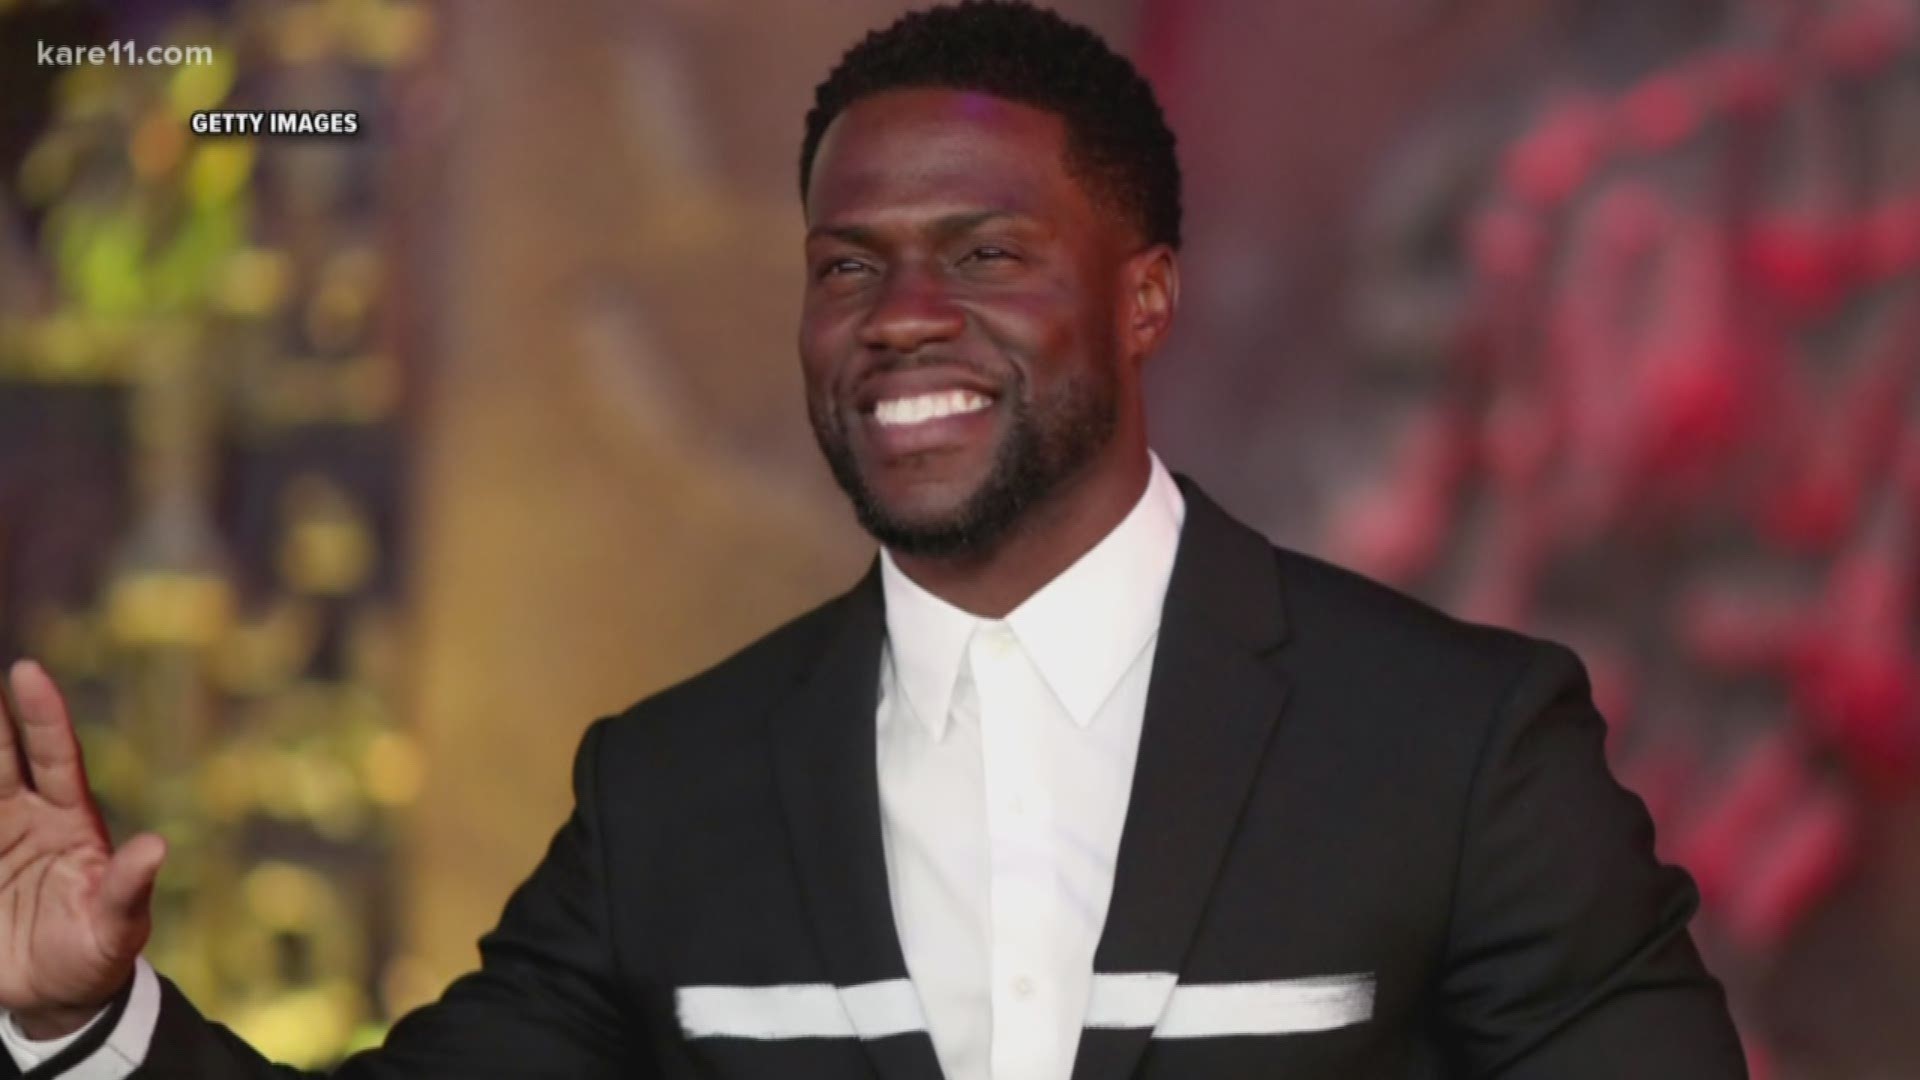 Kevin Hart stepped down from hosting the Oscars after the backlash surrounding previous homophobic tweets. But on Monday, Nick Cannon came to his defense, prompting the question: is there a double standard for comedians of color? https://kare11.tv/2GajQqM